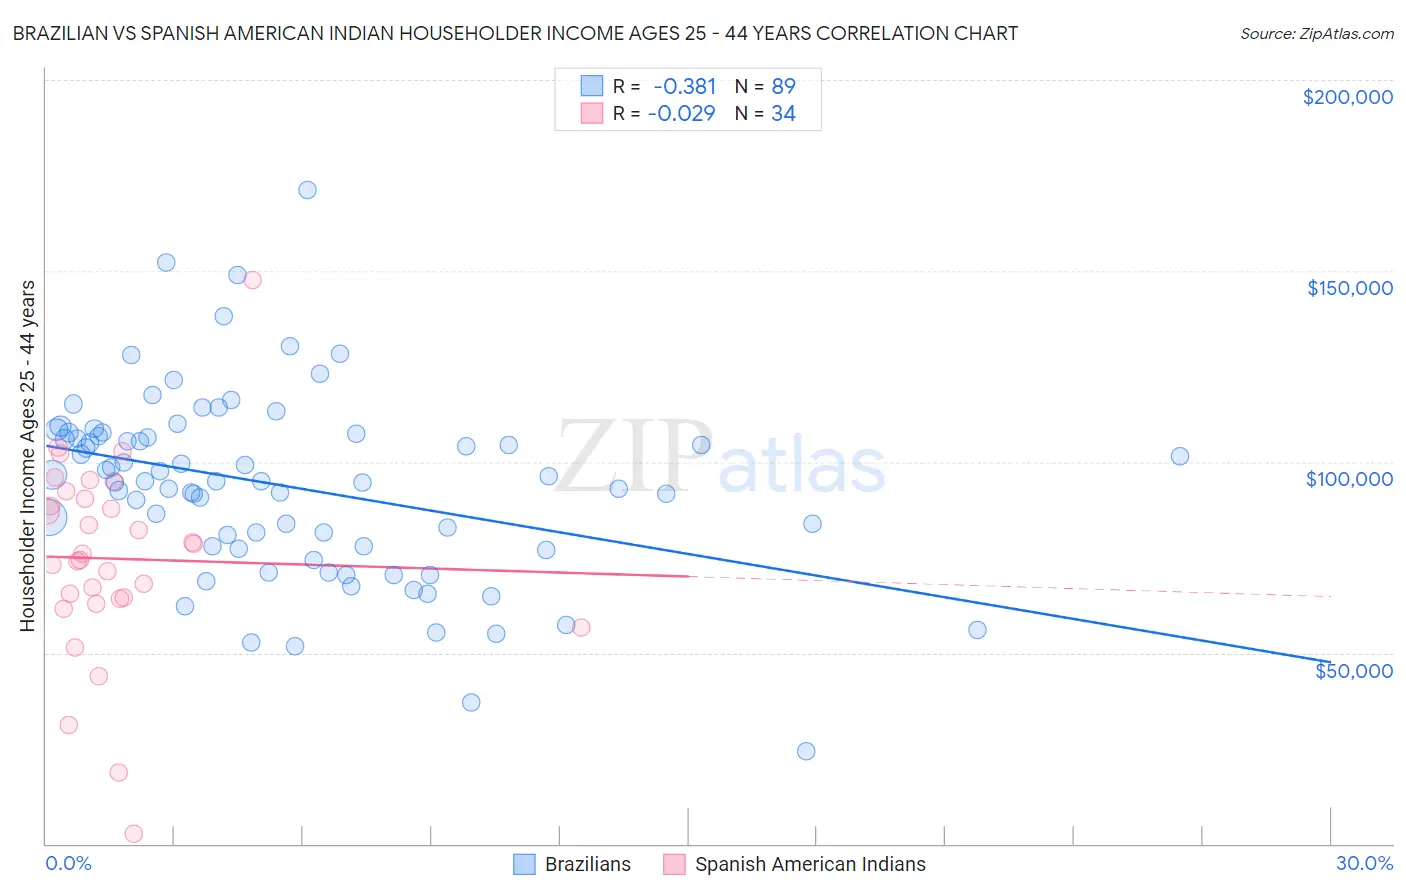 Brazilian vs Spanish American Indian Householder Income Ages 25 - 44 years